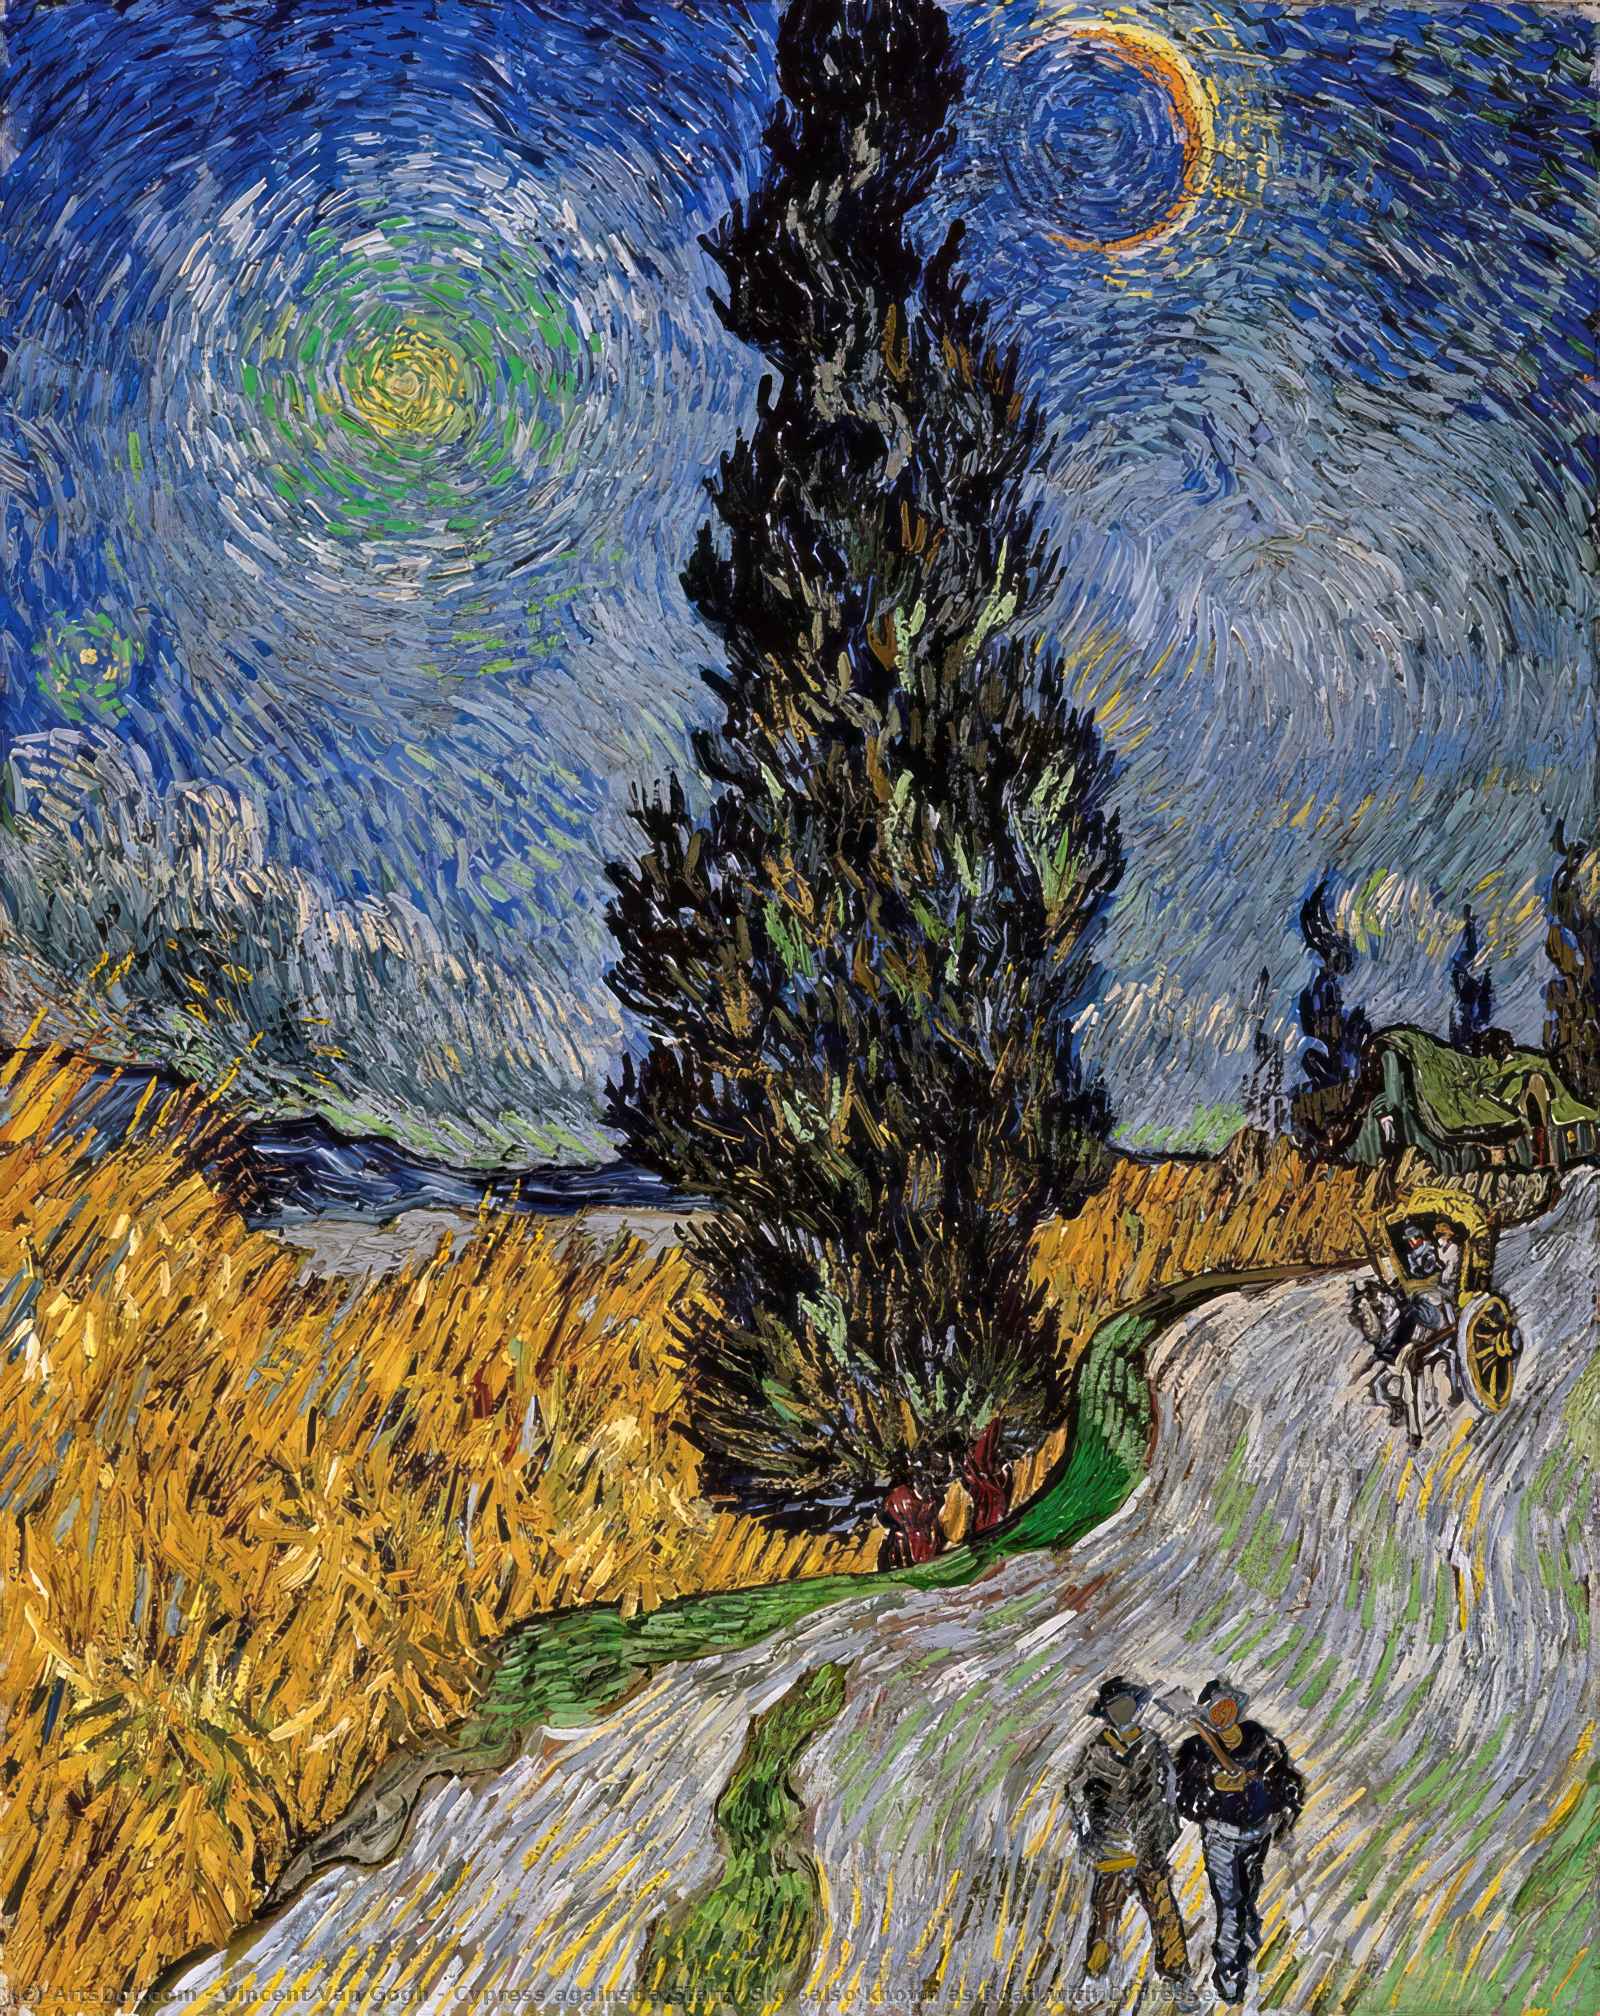 WikiOO.org - 백과 사전 - 회화, 삽화 Vincent Van Gogh - Cypress against a Starry Sky (also known as Road with Cypresses)